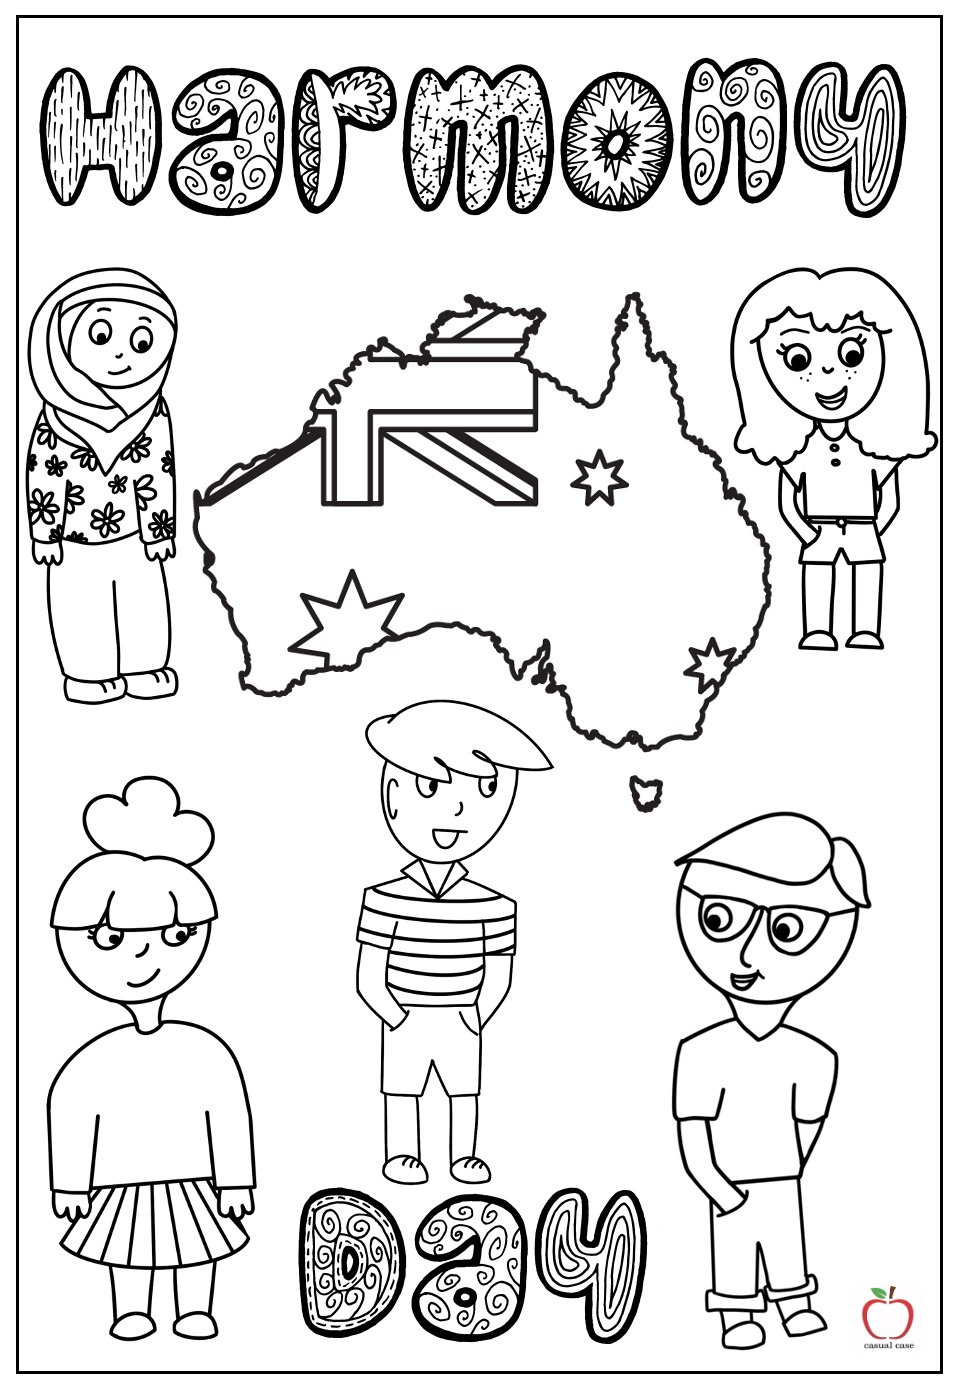 Racial Harmony Day Colouring Pages